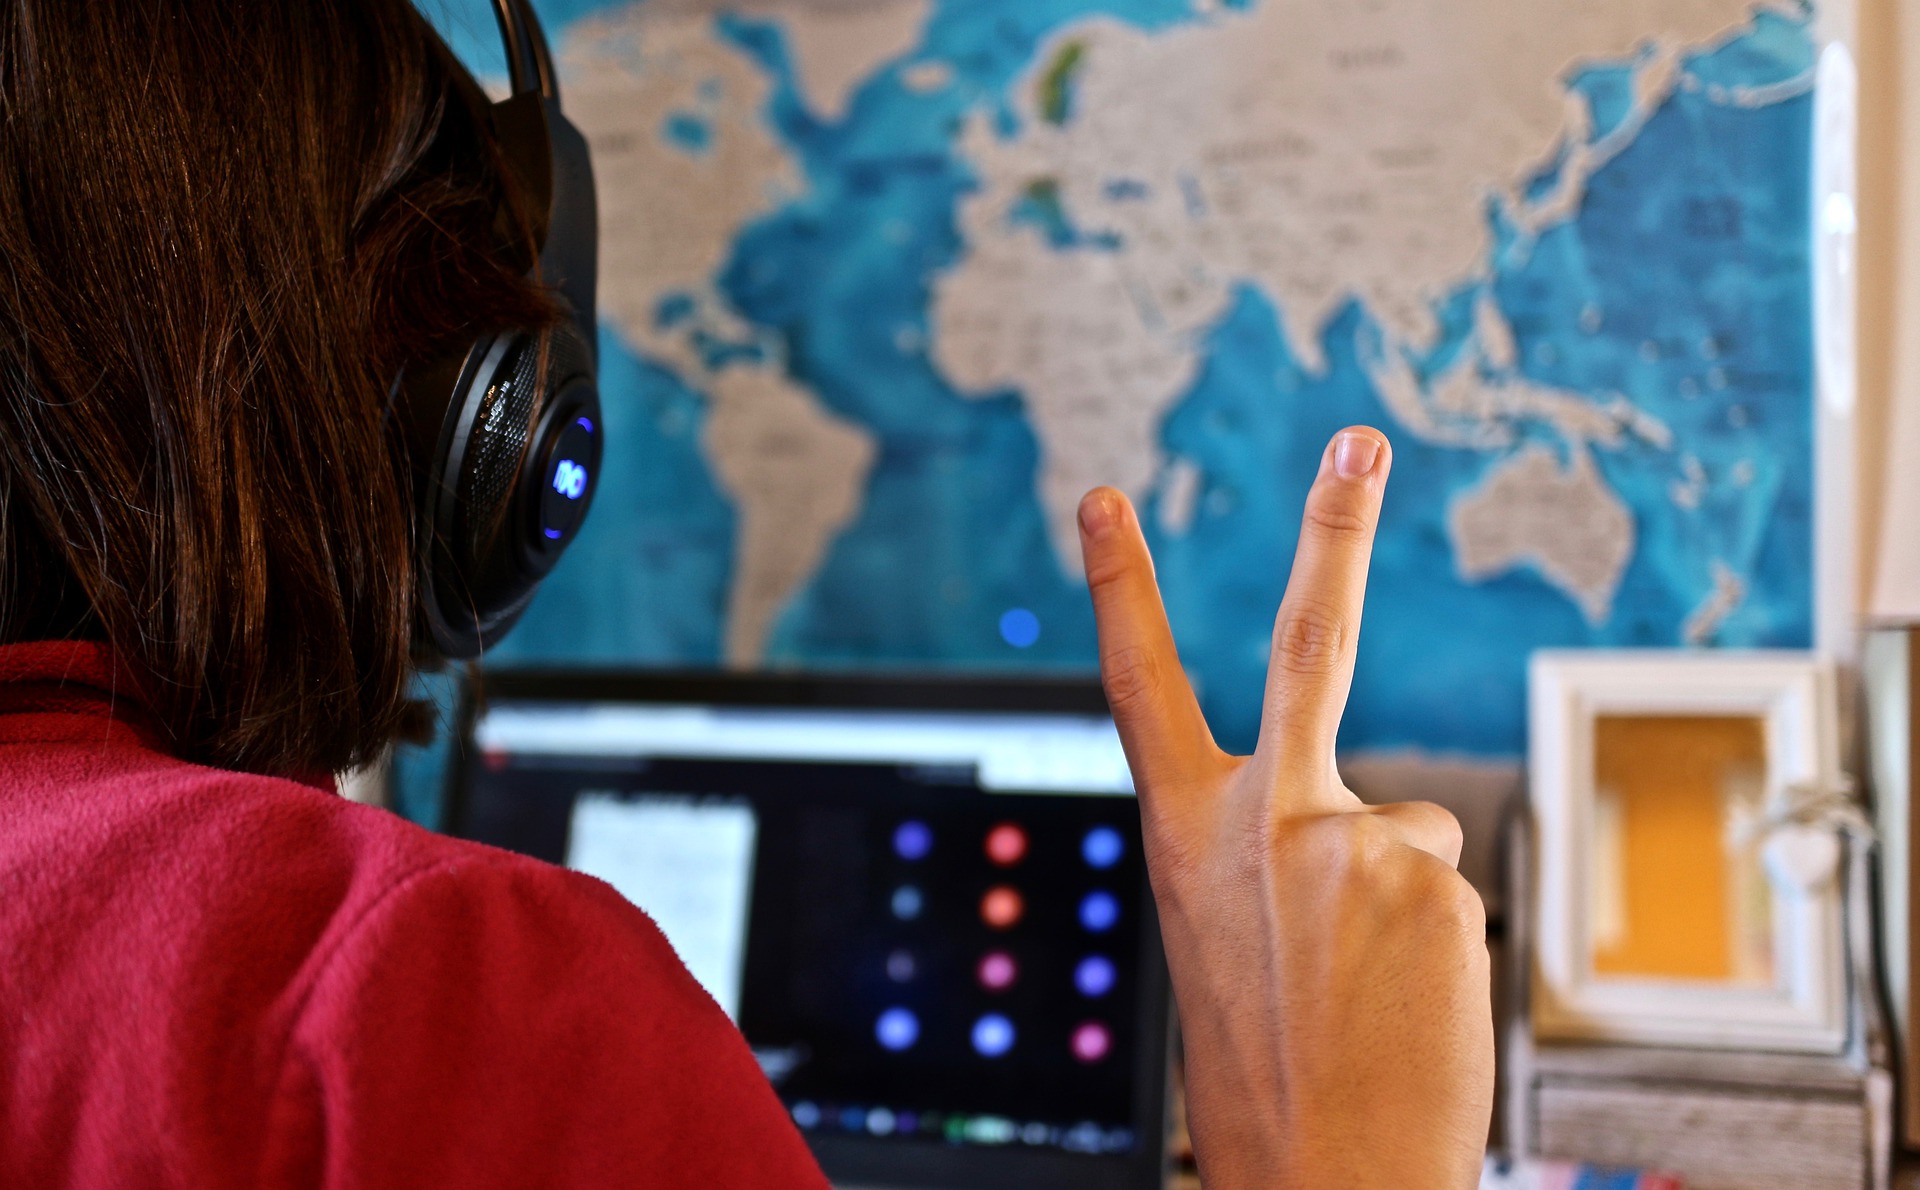 Student wearing headphones during remote learning session